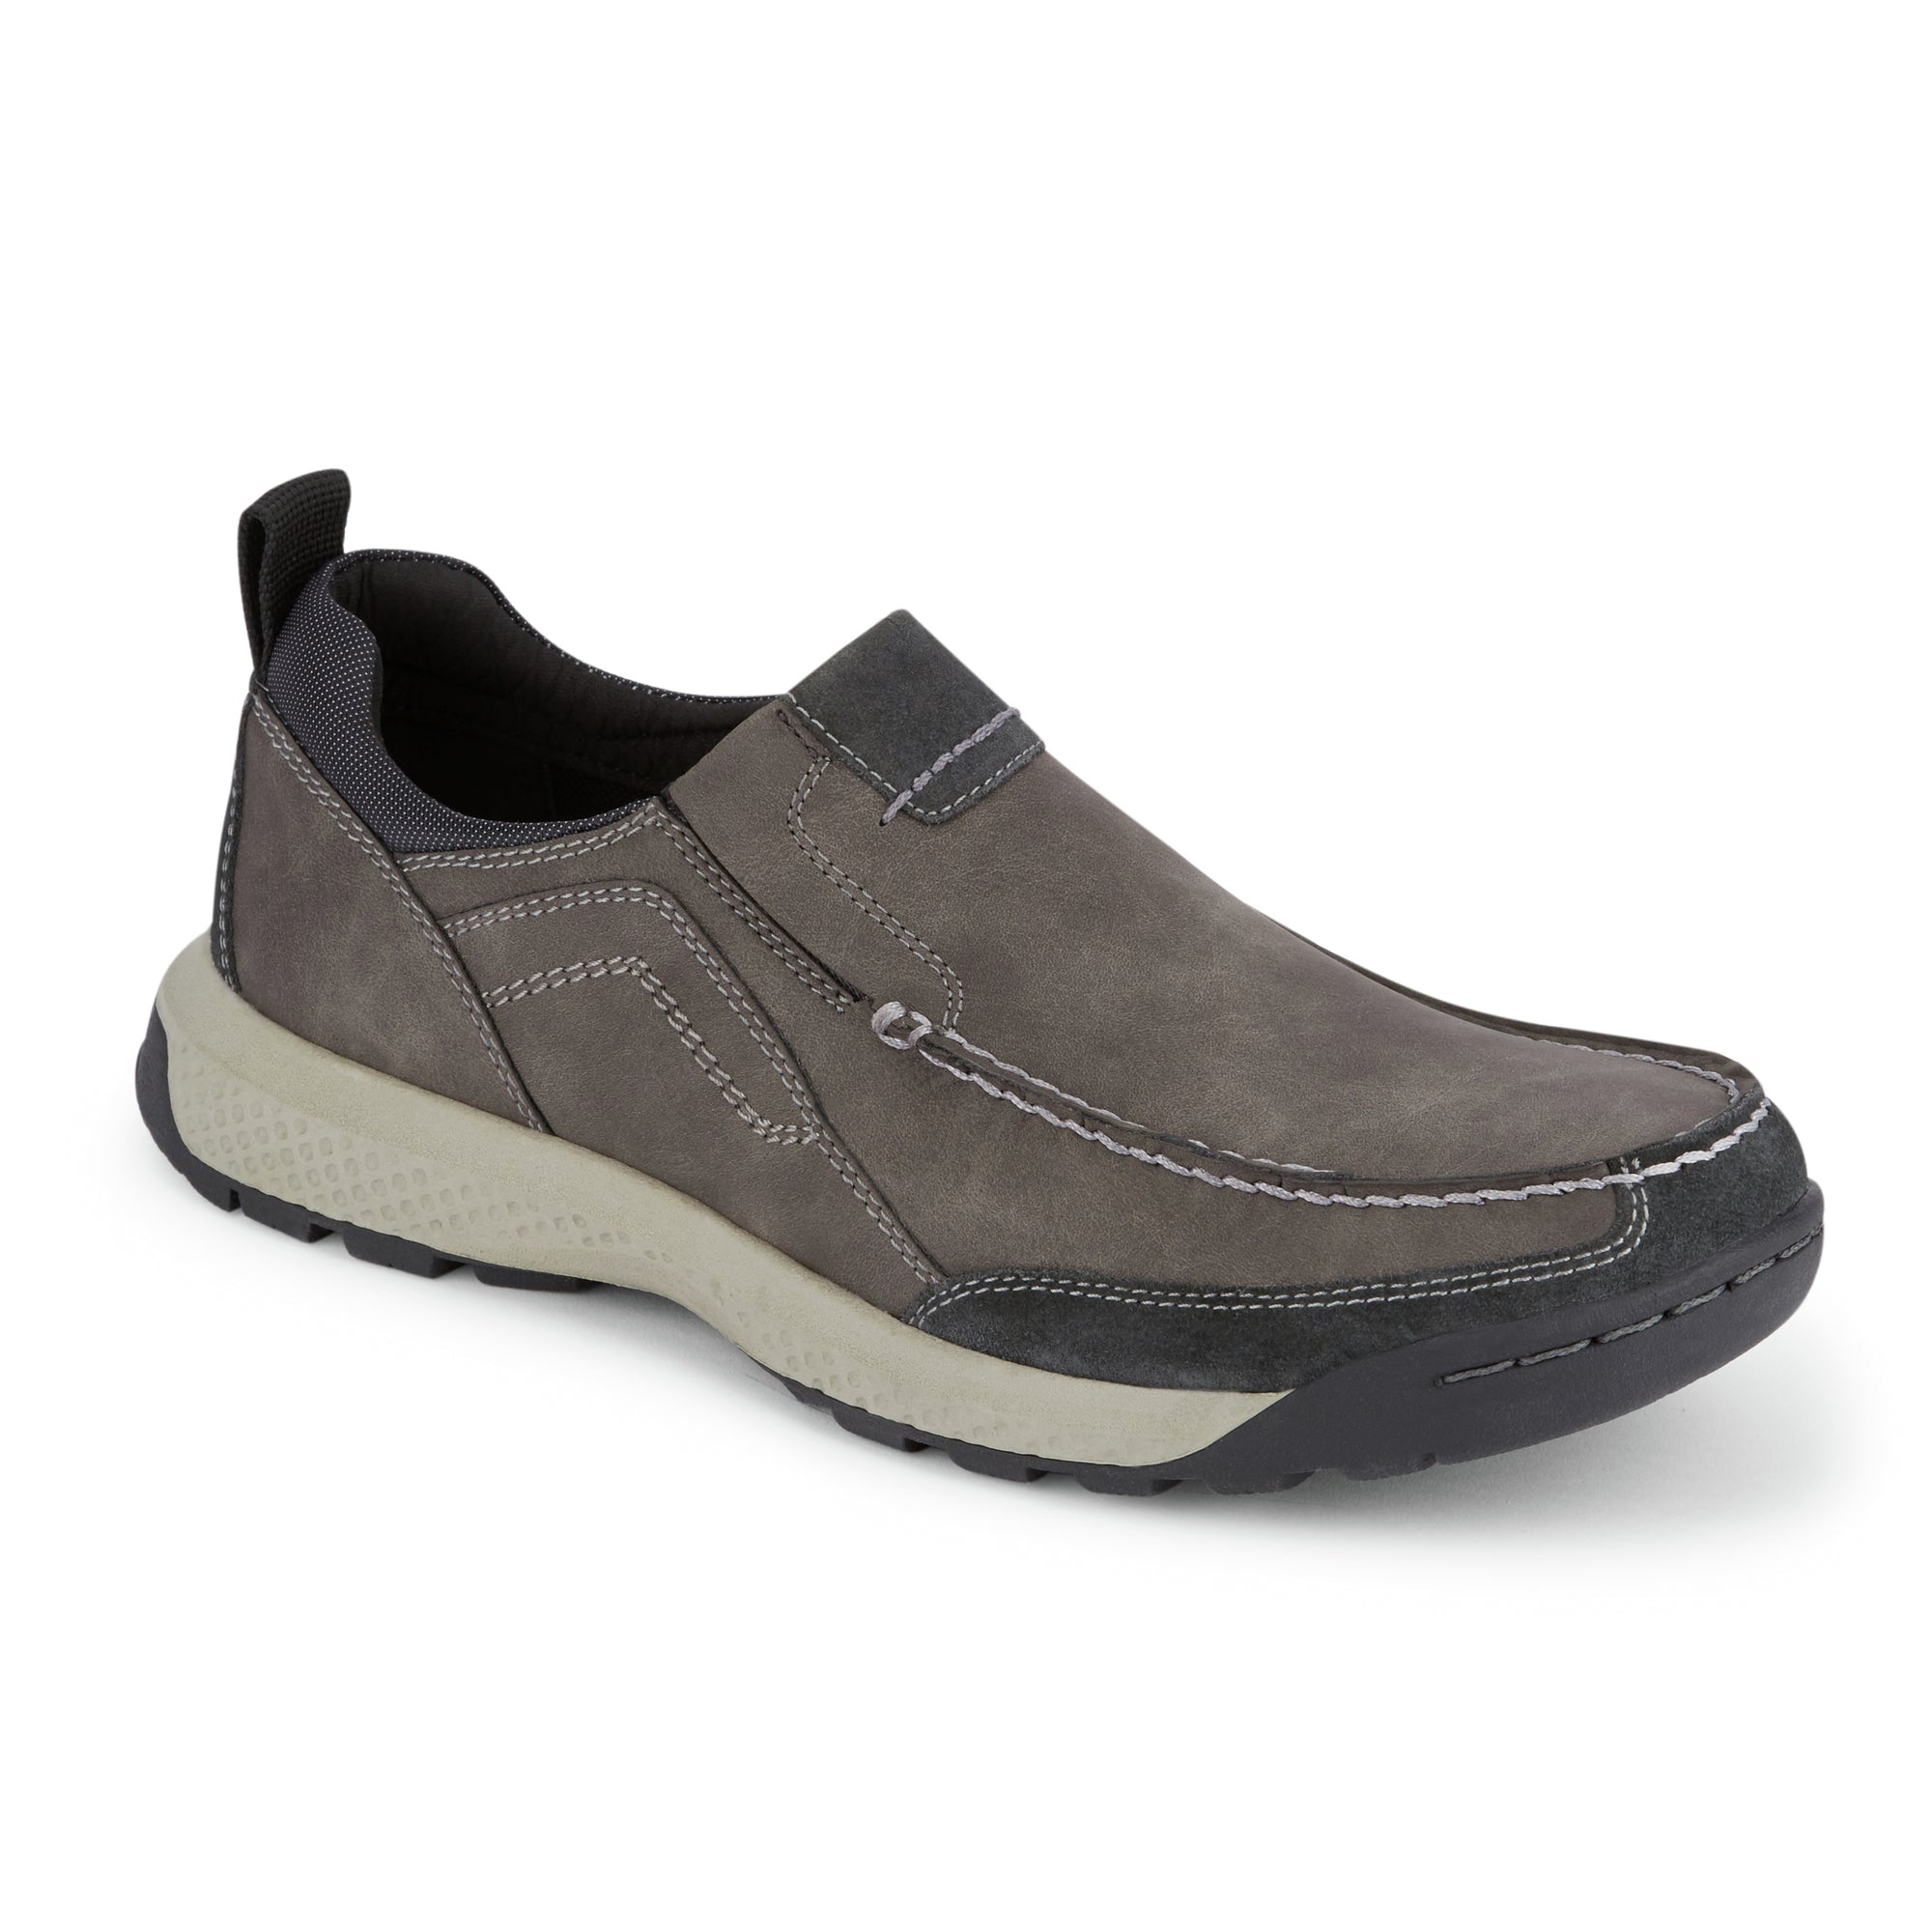 Albright - Rugged Slip-on - Dockers Shoes